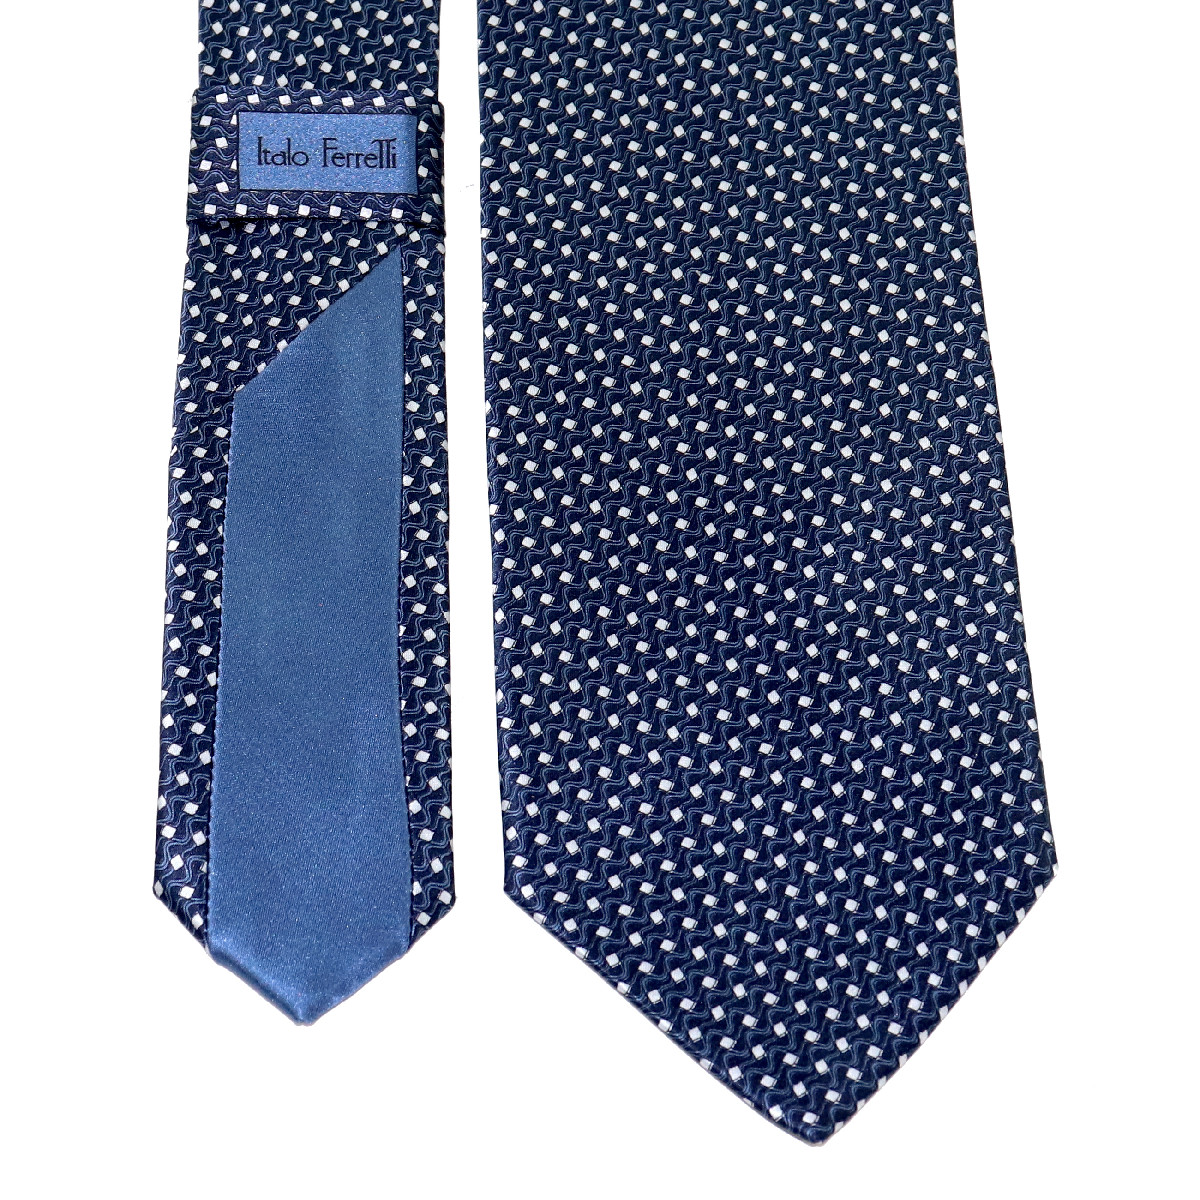 Refined tailored tie, navy blue and light gray geometric pattern ...